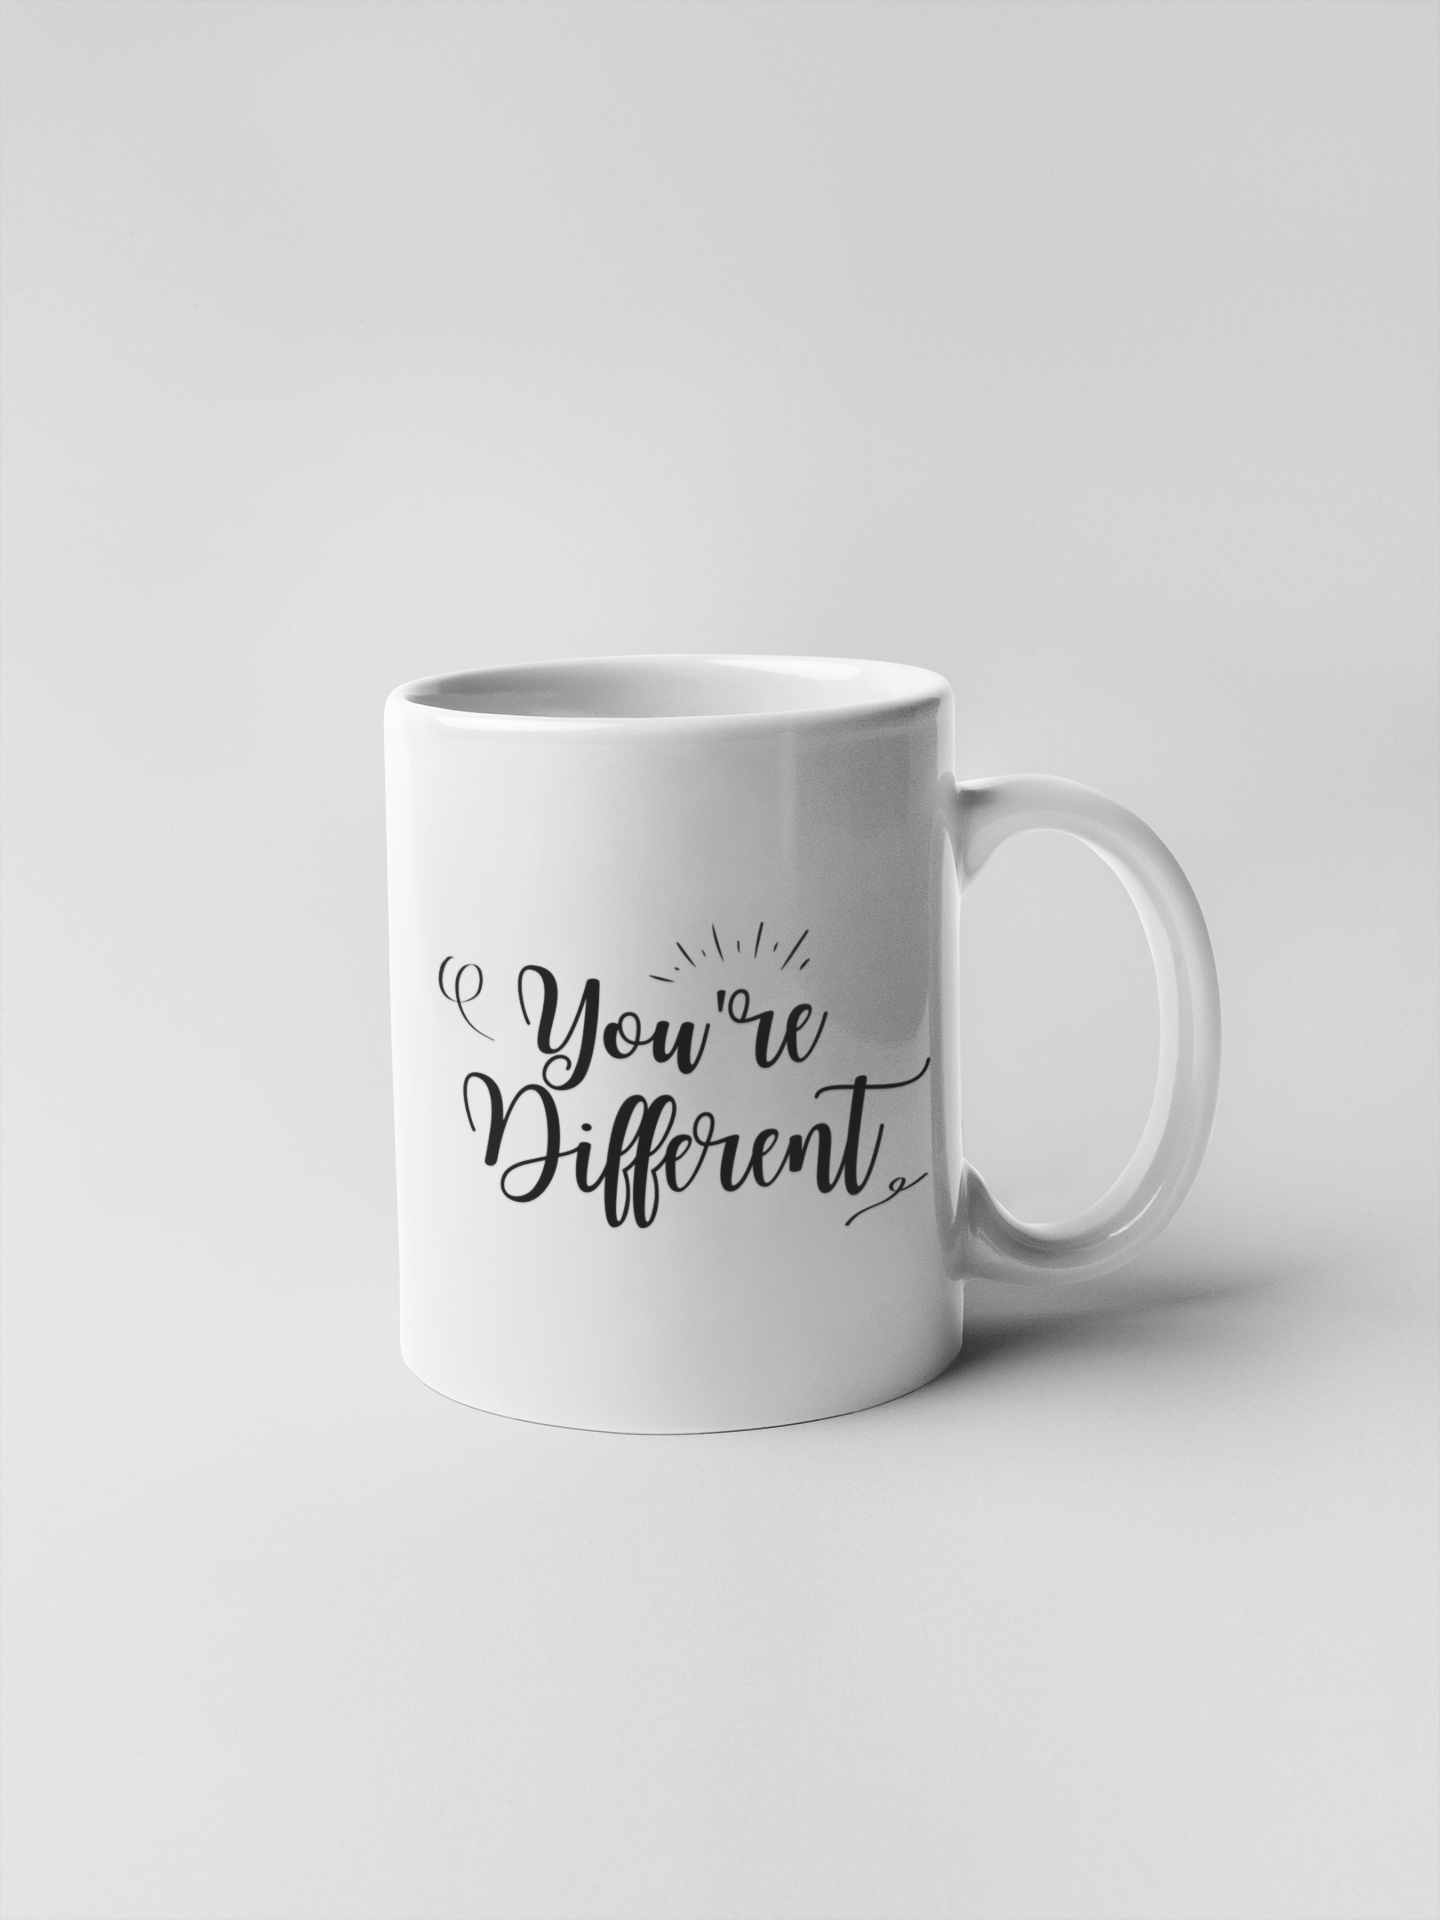 Black and White Beautiful Lettering Ceramic Coffee Mugs